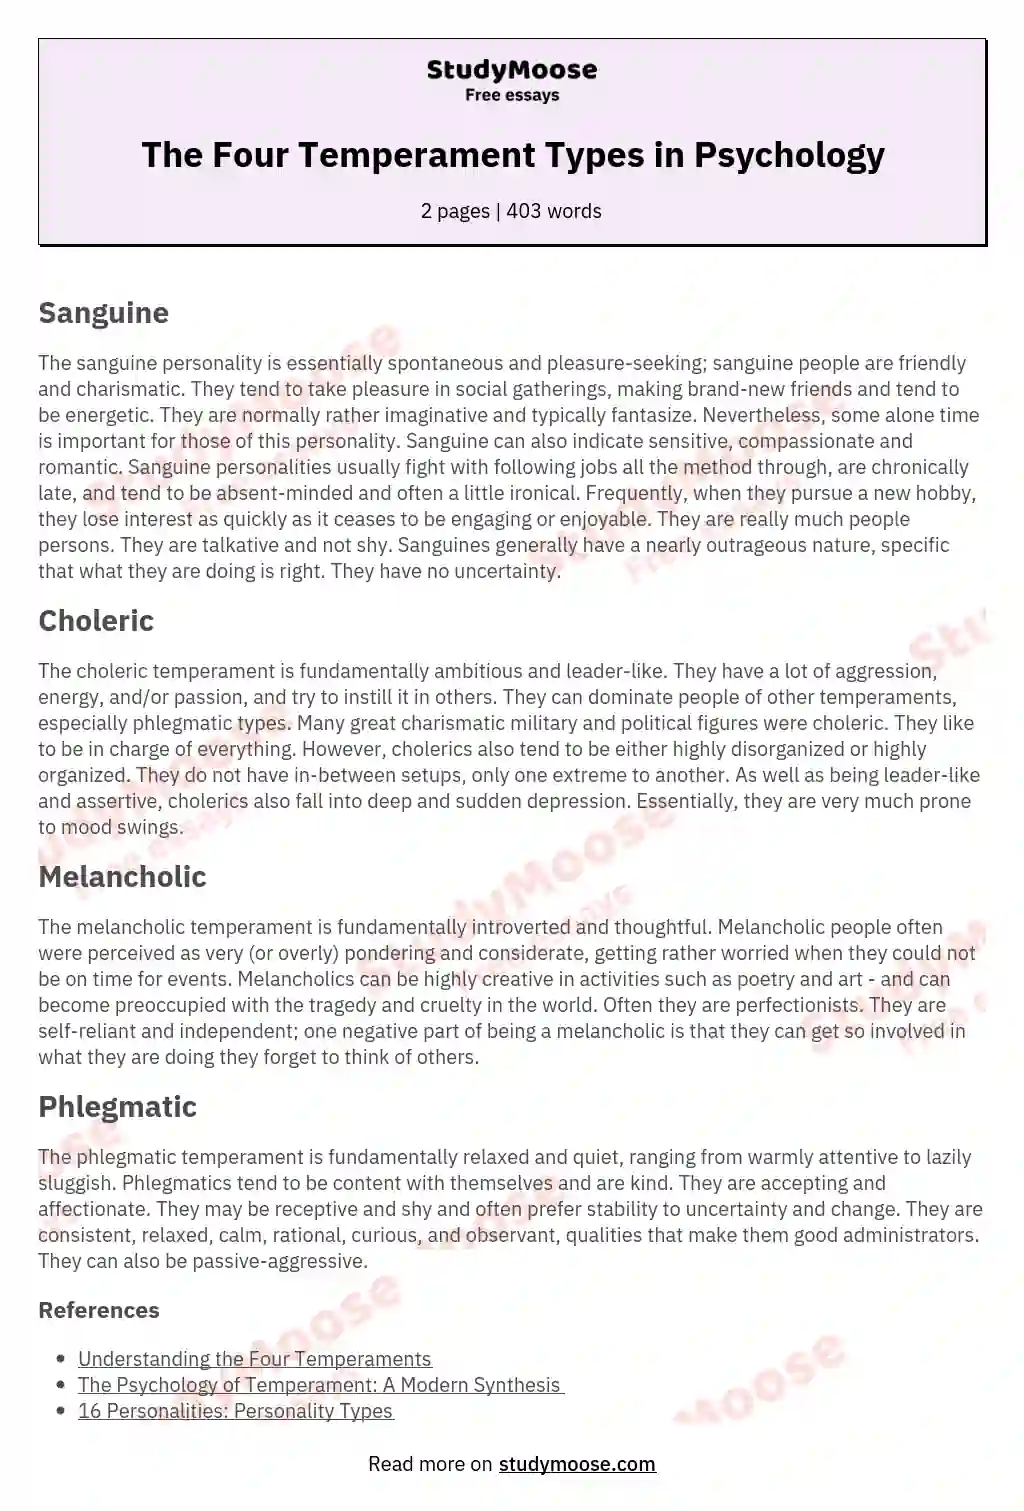 The Four Temperament Types in Psychology essay